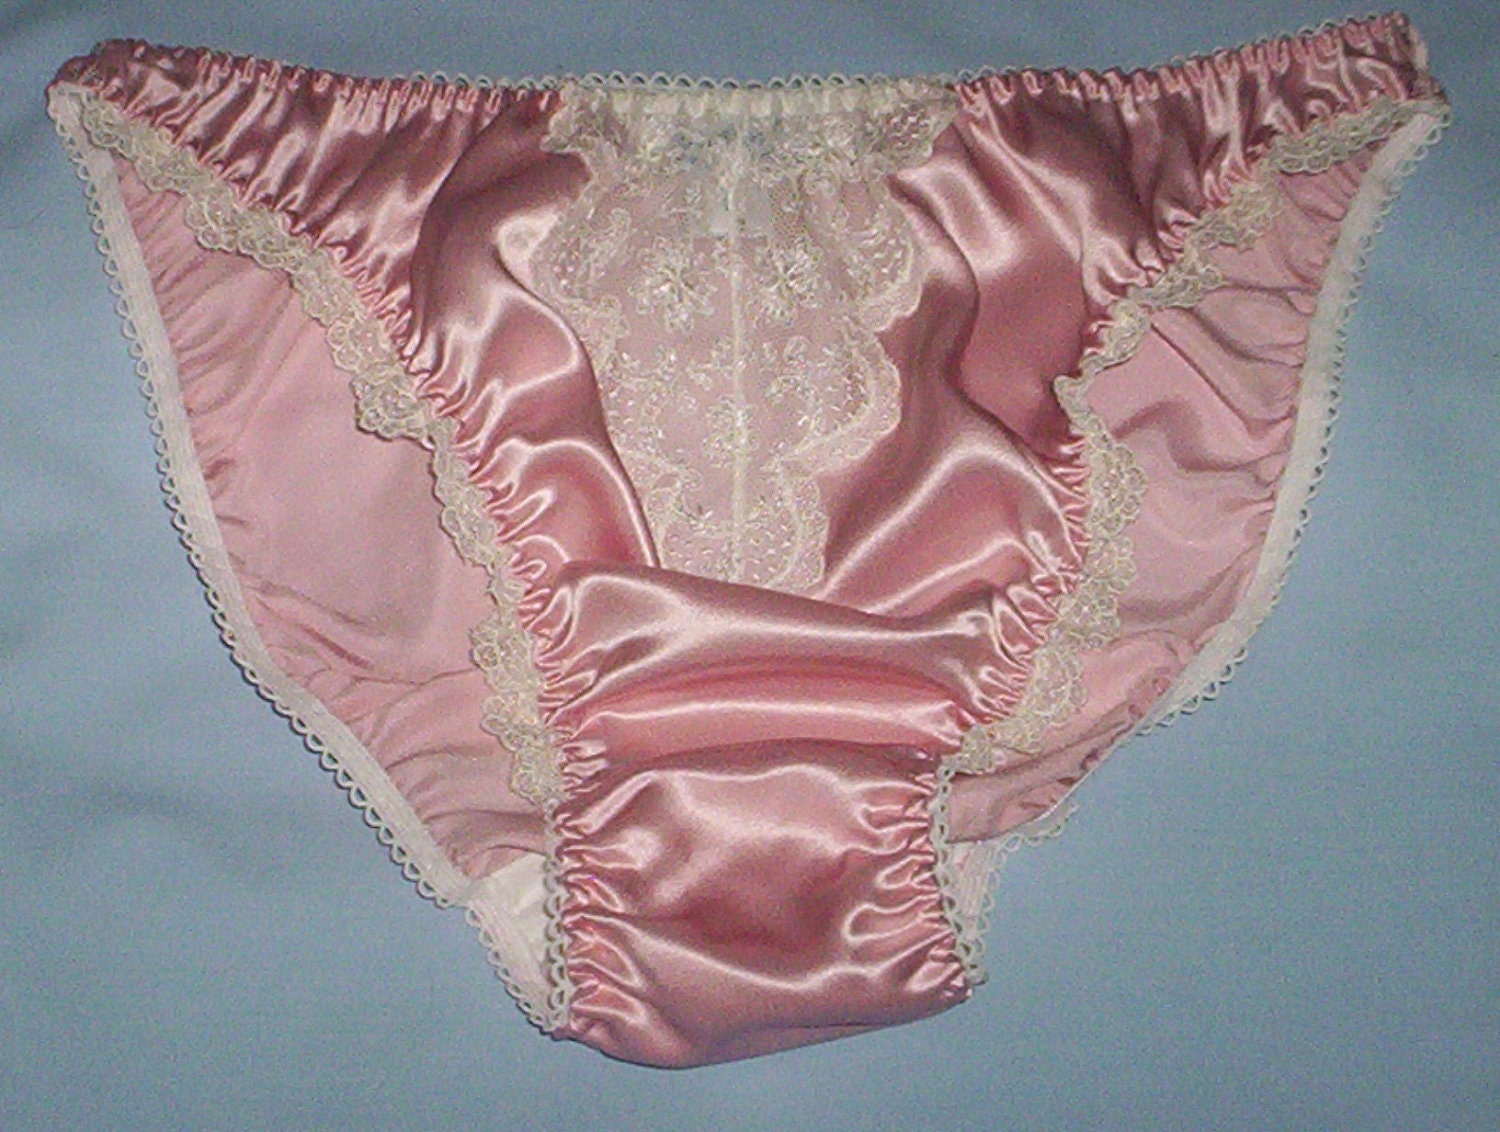 Rose pink silk satin and lace panties in UK sizes 8 to 20